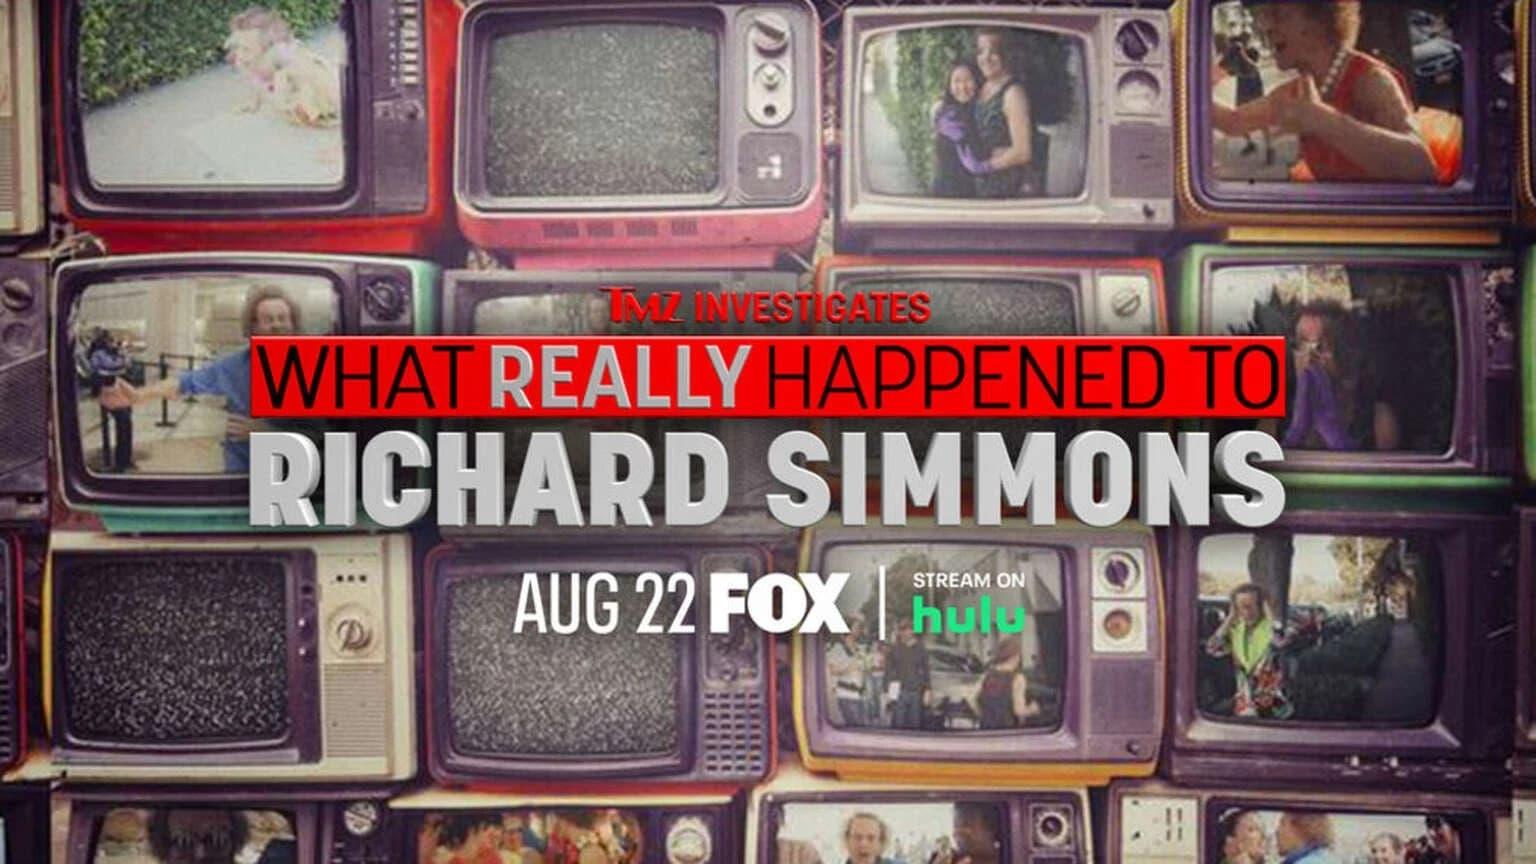 TMZ Investigates: What Really Happened to Richard Simmons backdrop